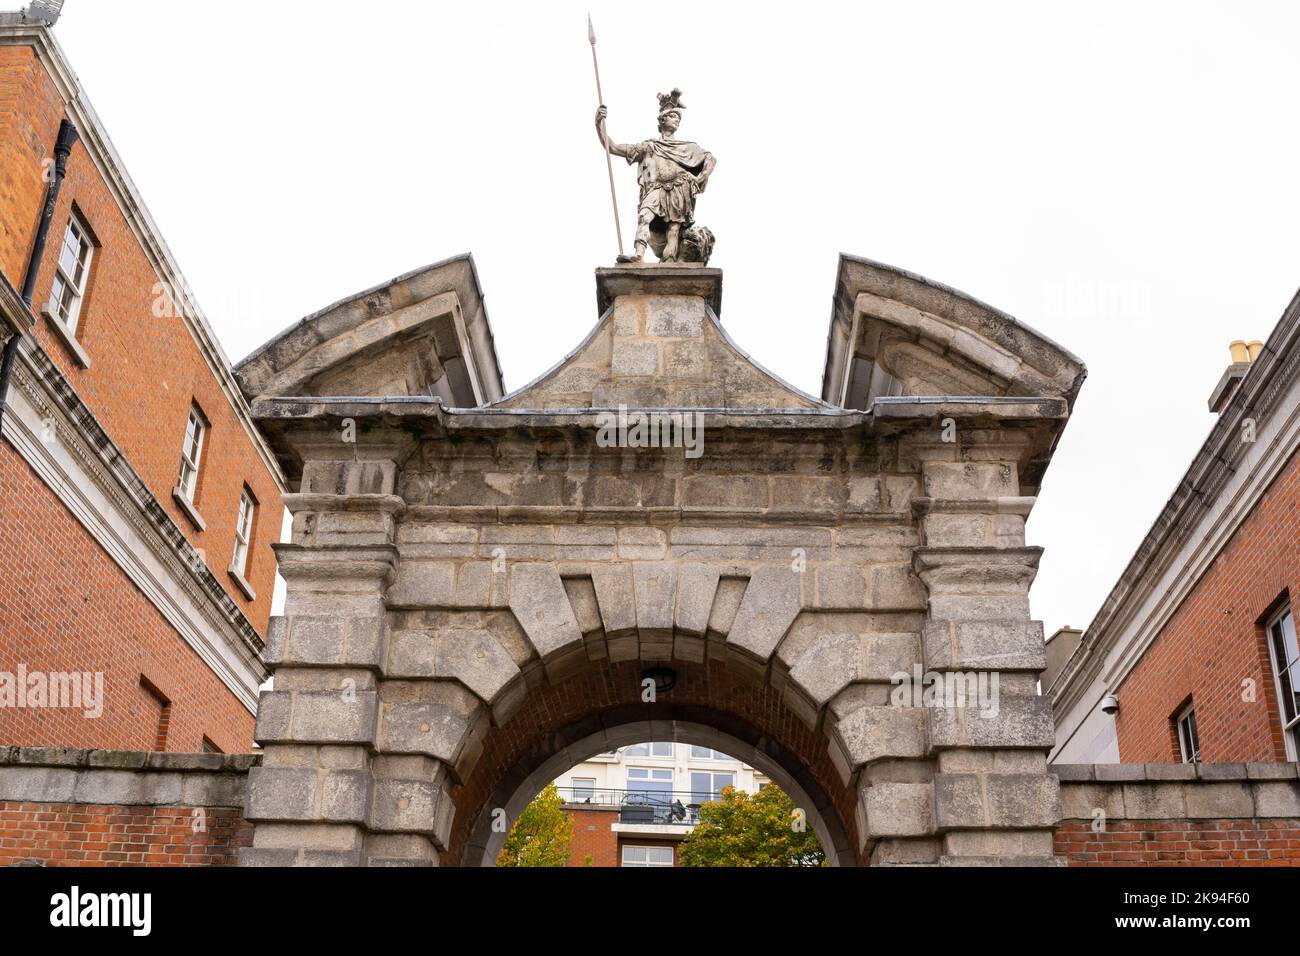 Ireland Eire Dublin Dame Street Dublin Castle Upper Yard Statue of Mars Fortitude soldier spear lion sculpture by Jon Van Most the younger 1753 Stock Photo